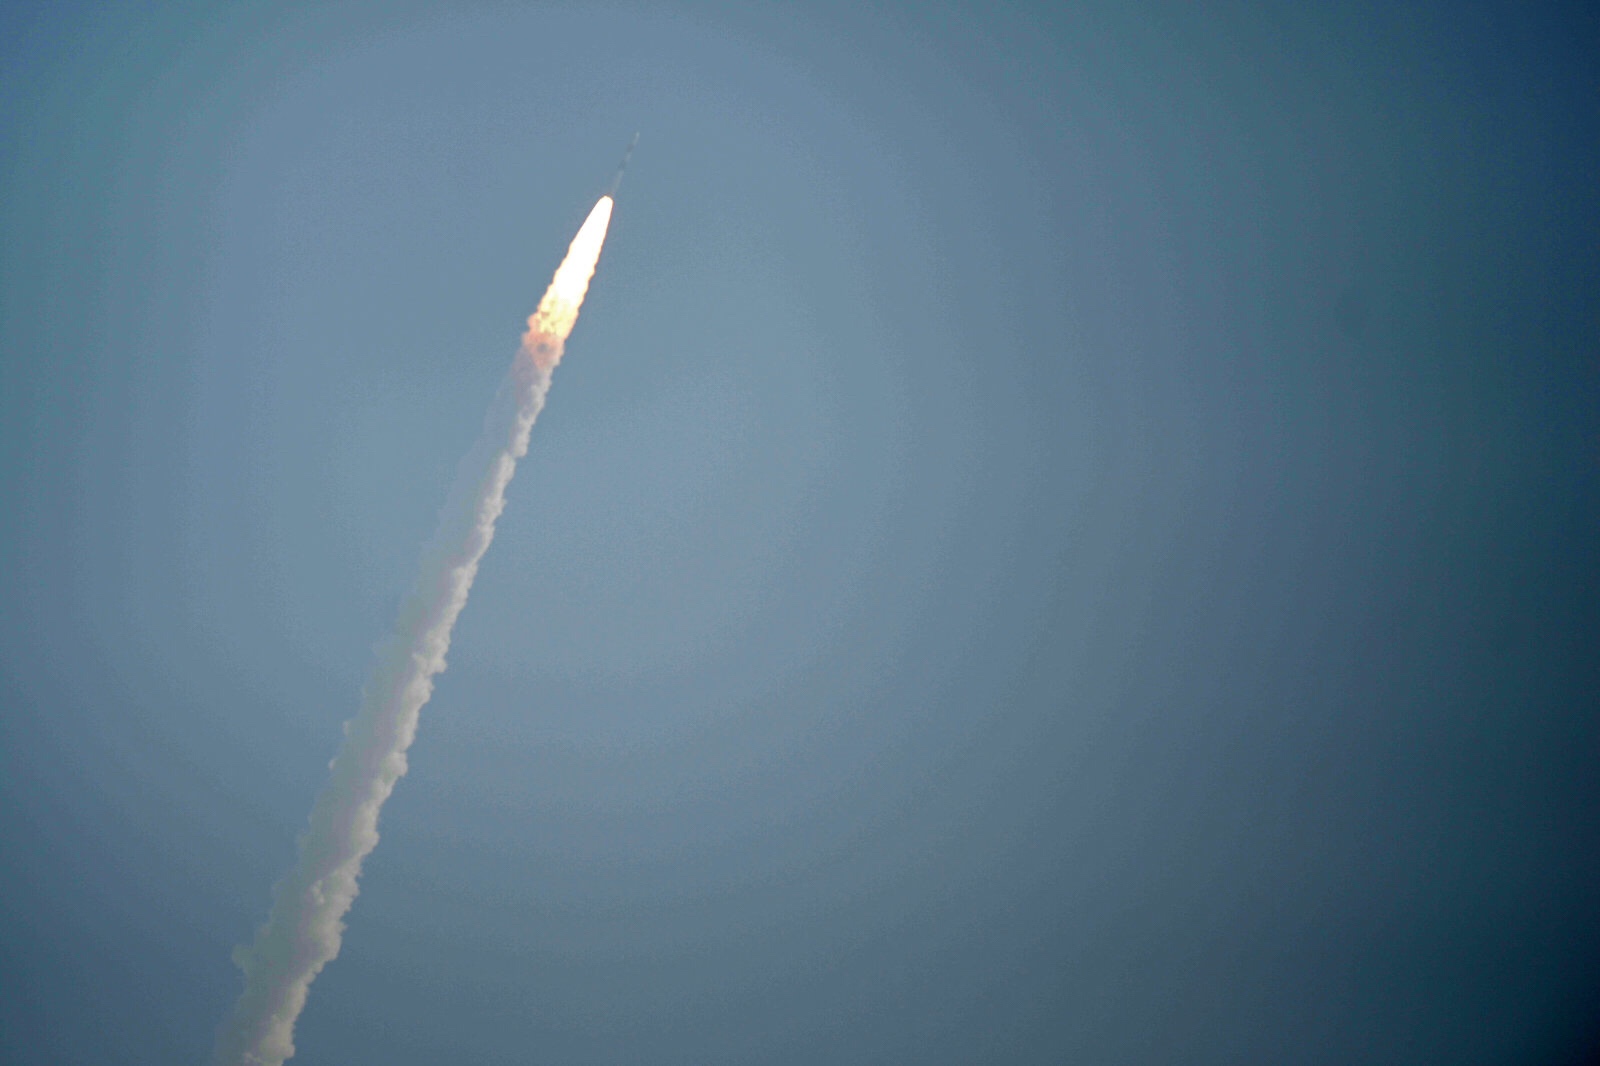 FCC is accusing startup for launching satellites without permission